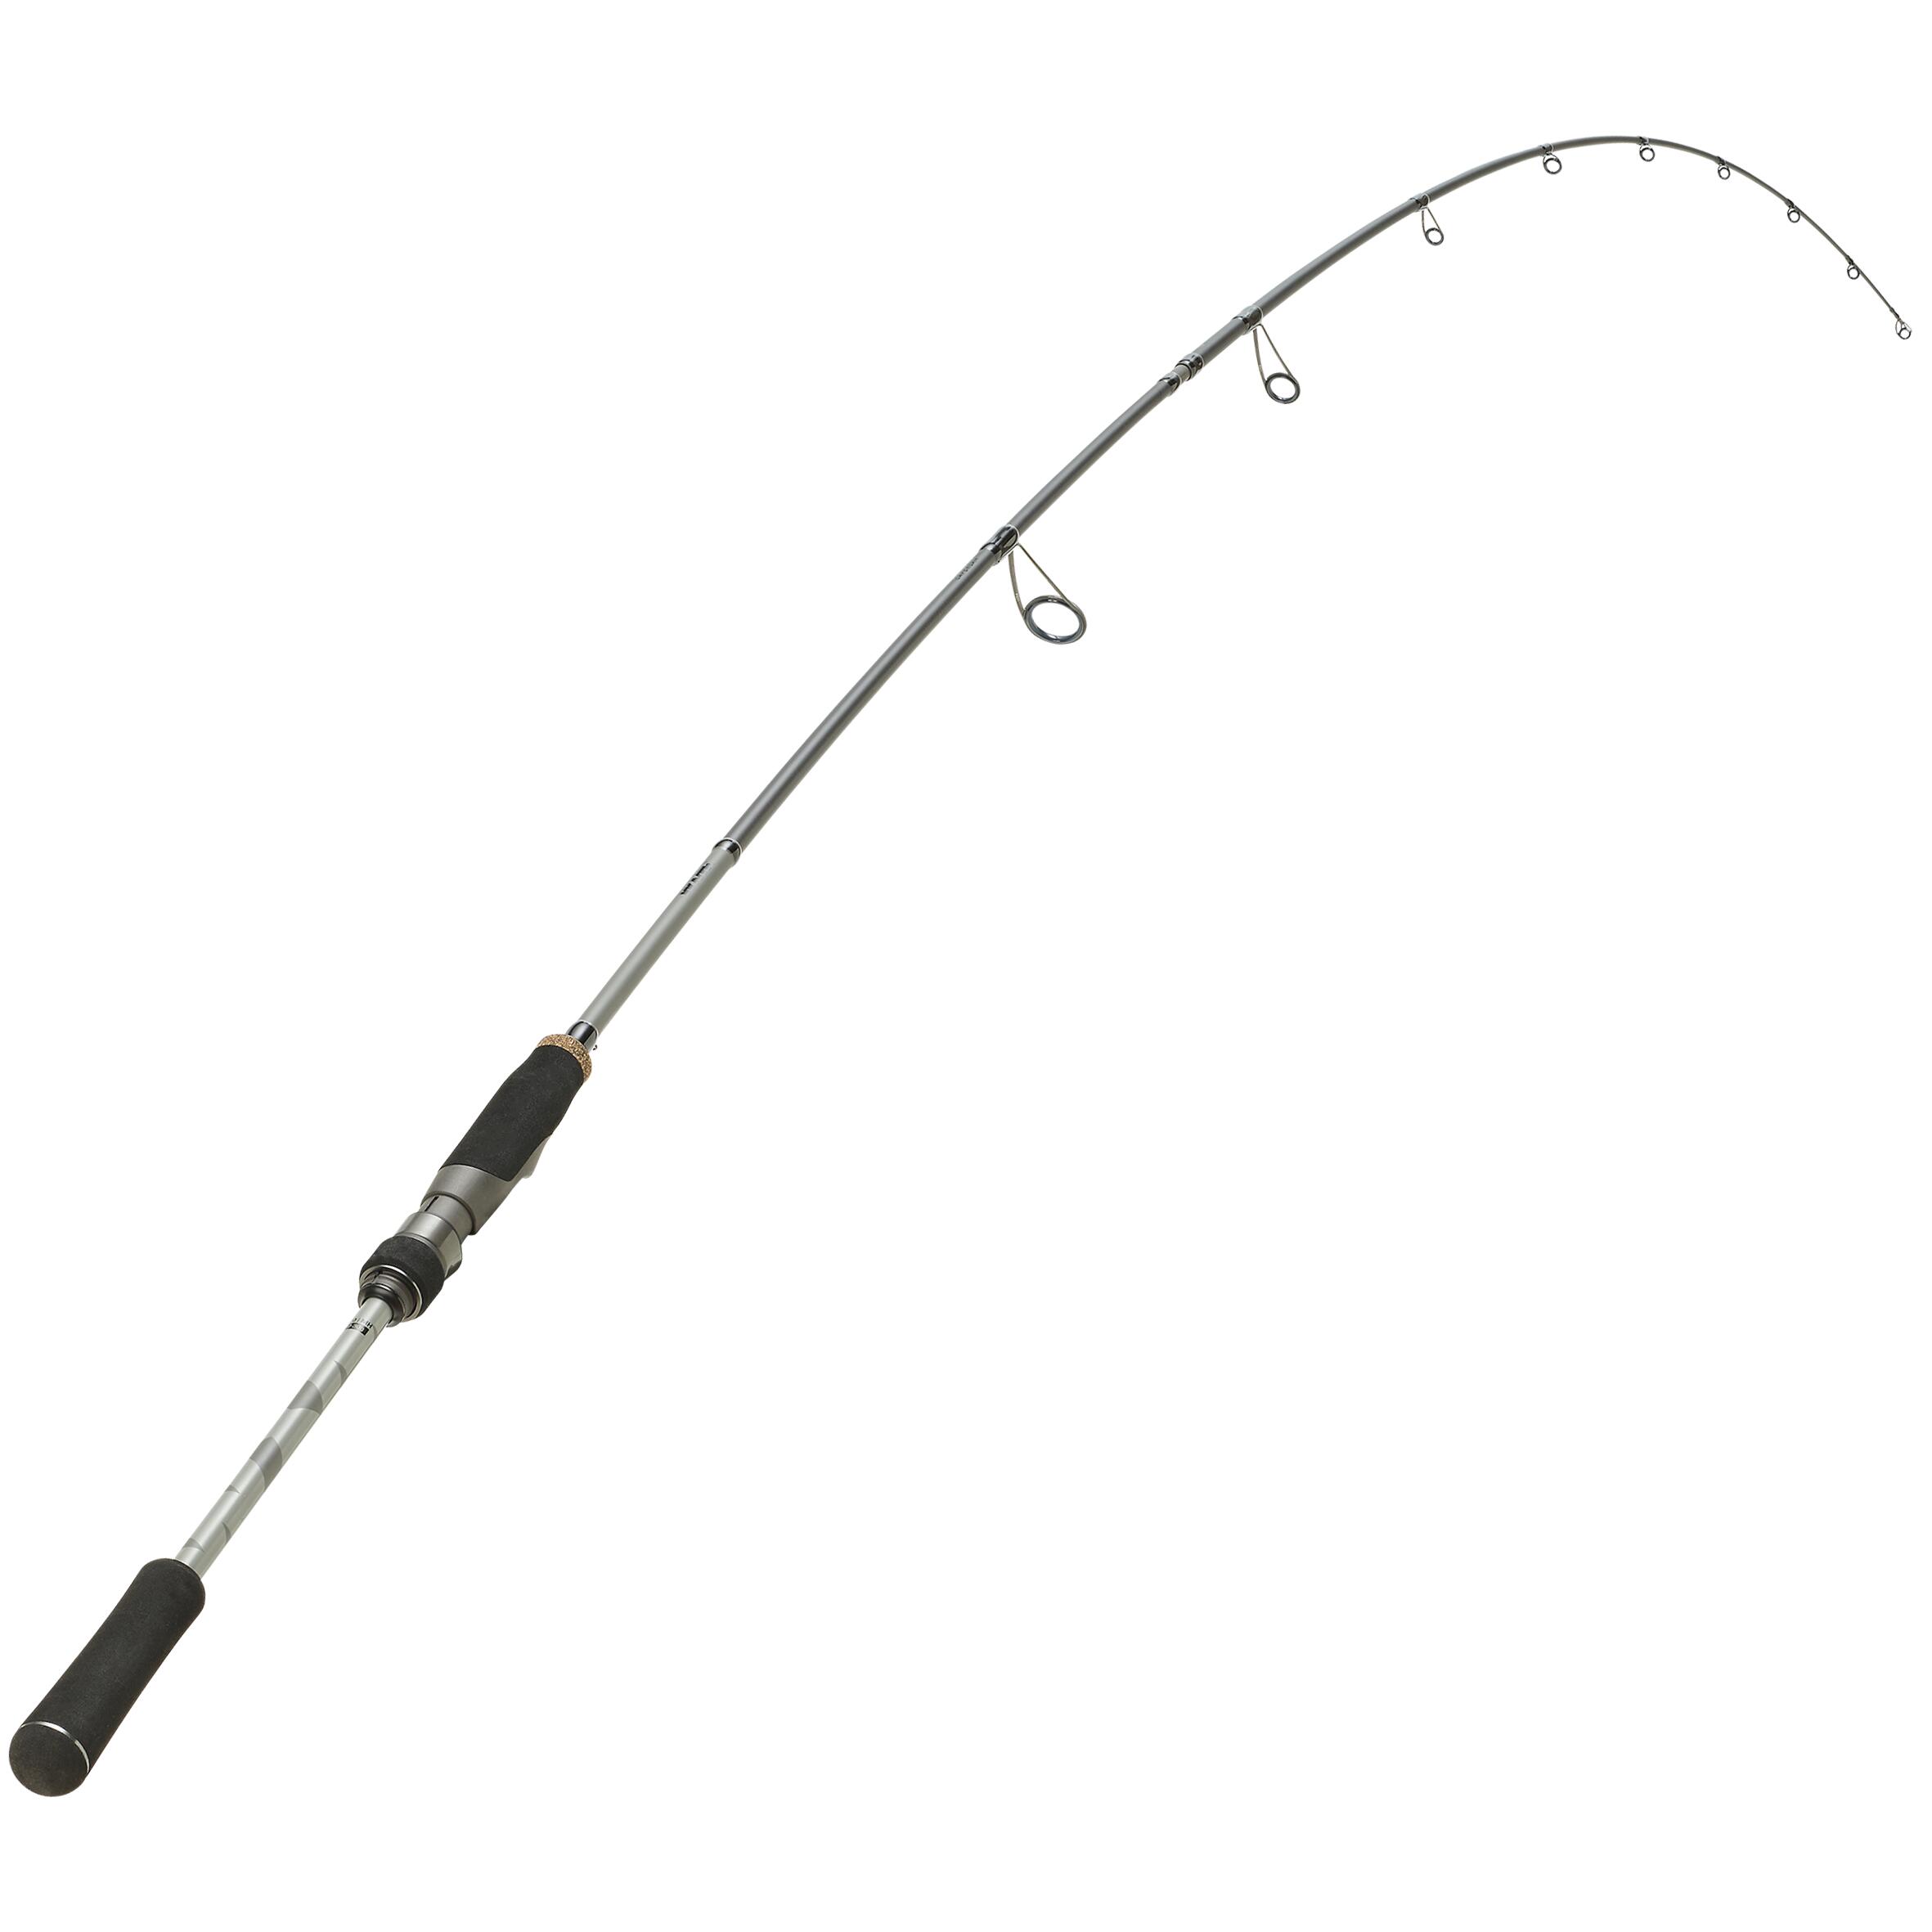 Caperlan Lure Fishing Rod Wxm-5 210 MH - One Size